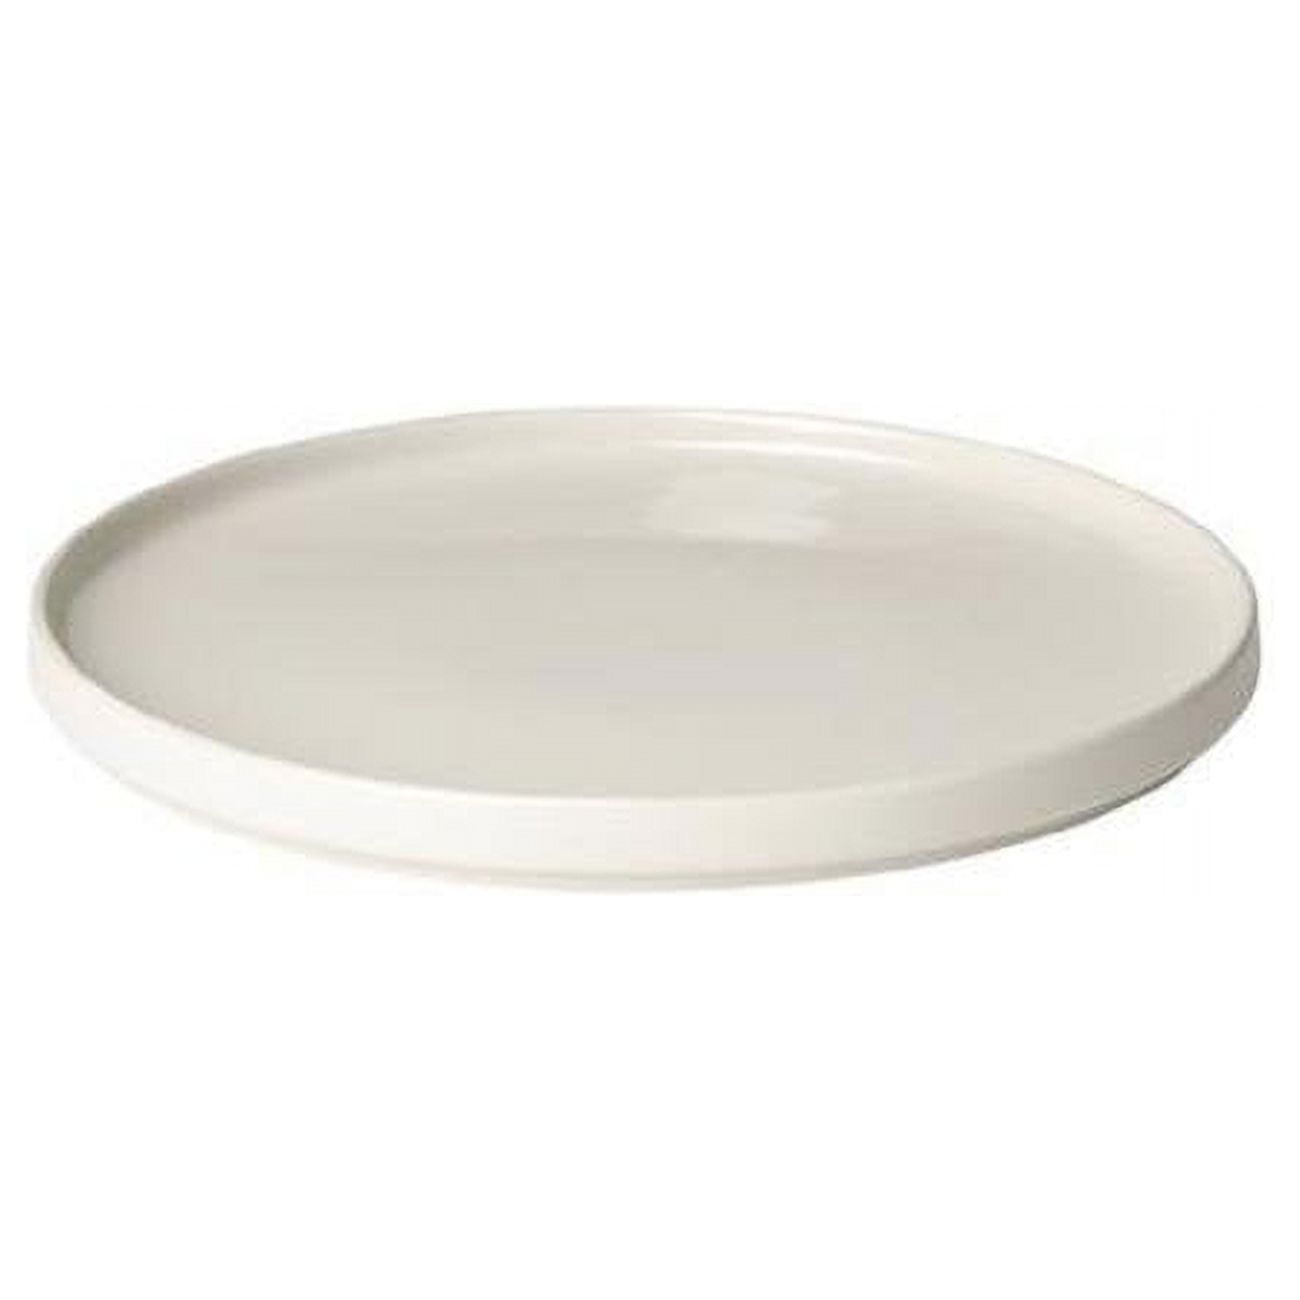 Picture of Blomus 63717.4 11 in. PILAR Dinner Plate  Grey - Set of 4